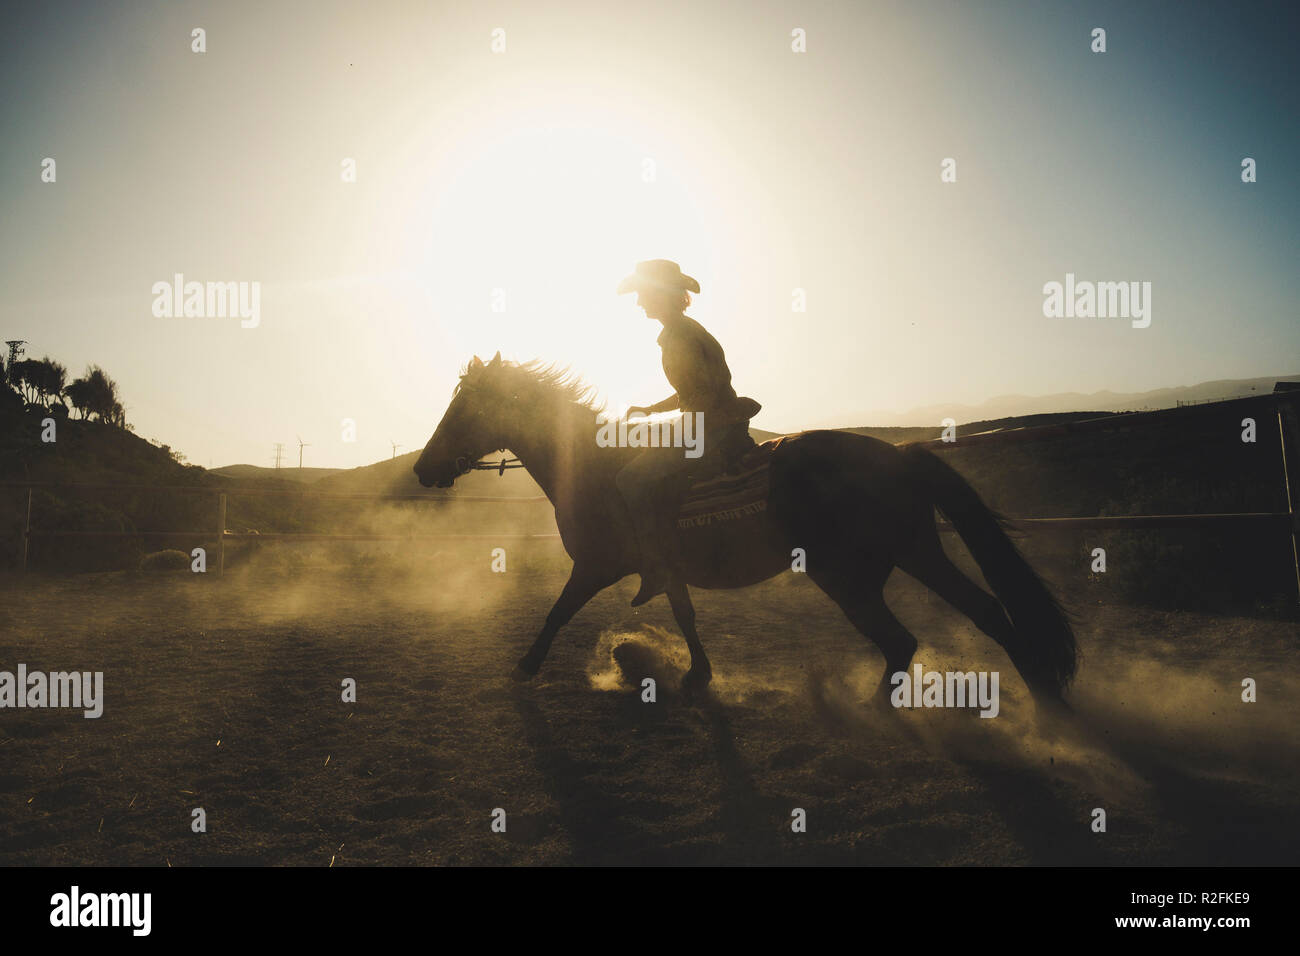 beautiful girl ride a horse in silhouette and backlight with sunflare and dust from the ground. epic and heroes image for speed and cowbot life and adventure concept. travel different lifestyle Stock Photo